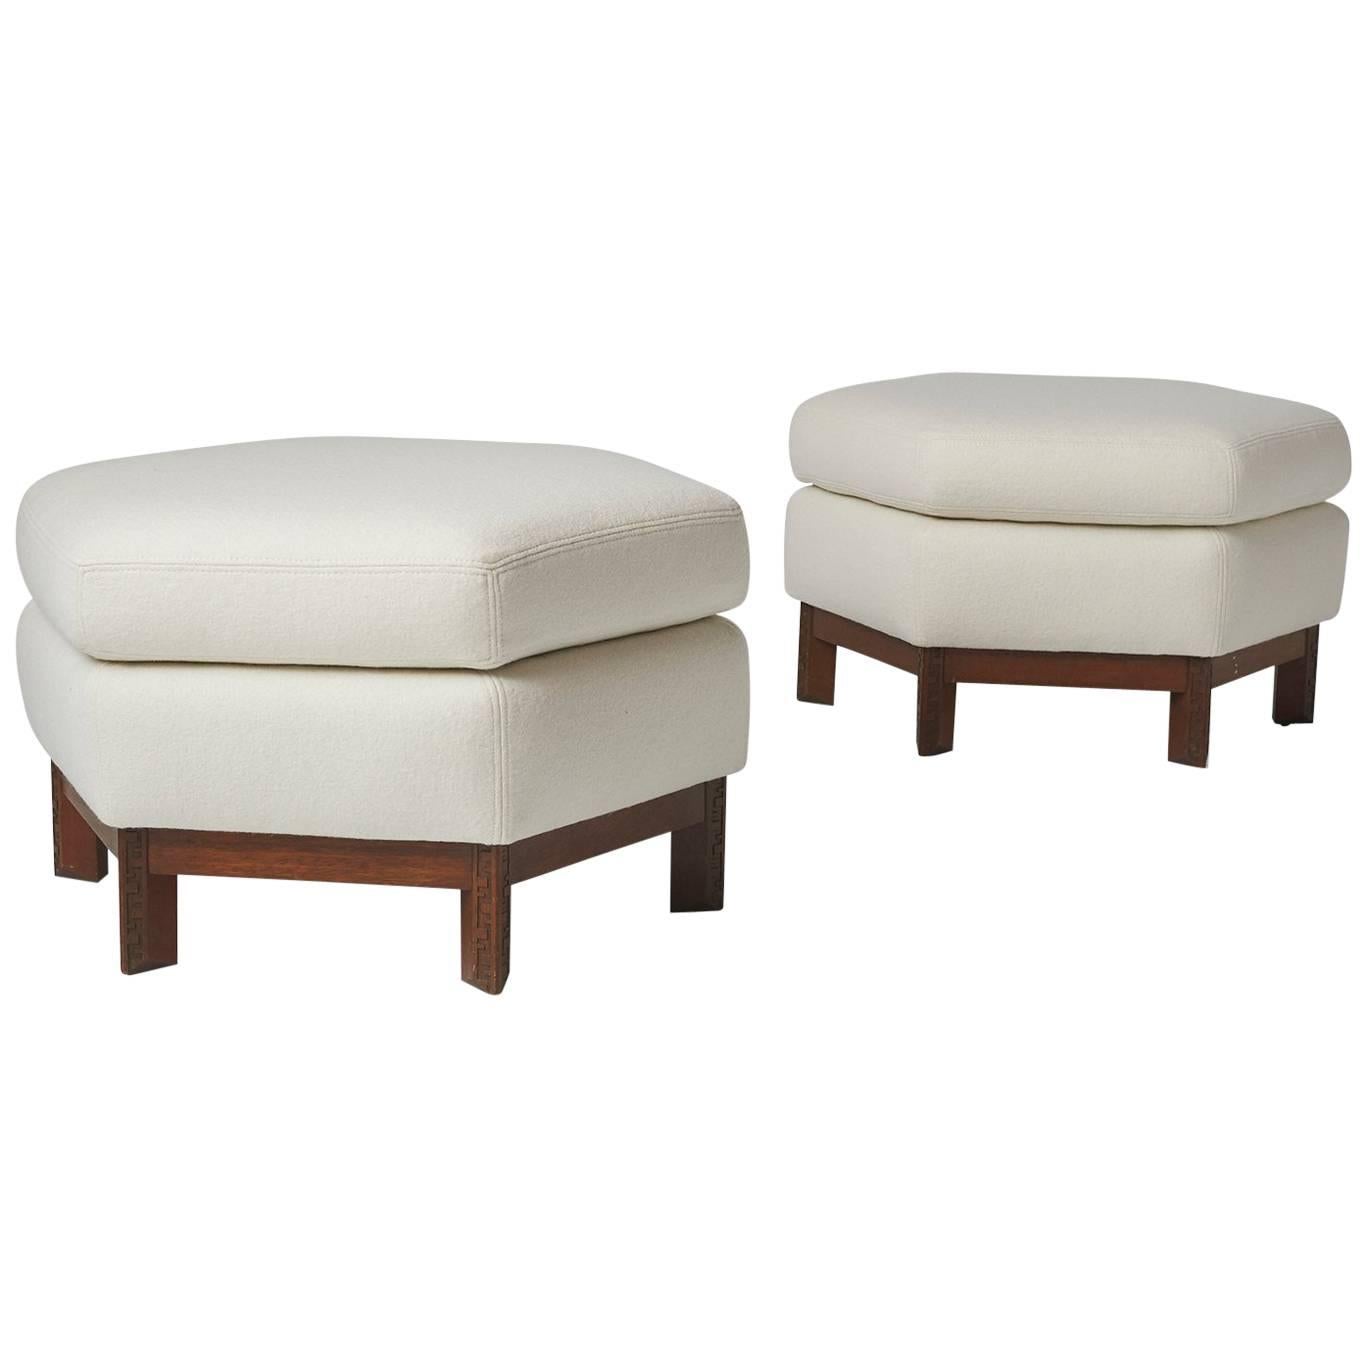 Pair of Ottomans by Frank Lloyd Wright for Henredon